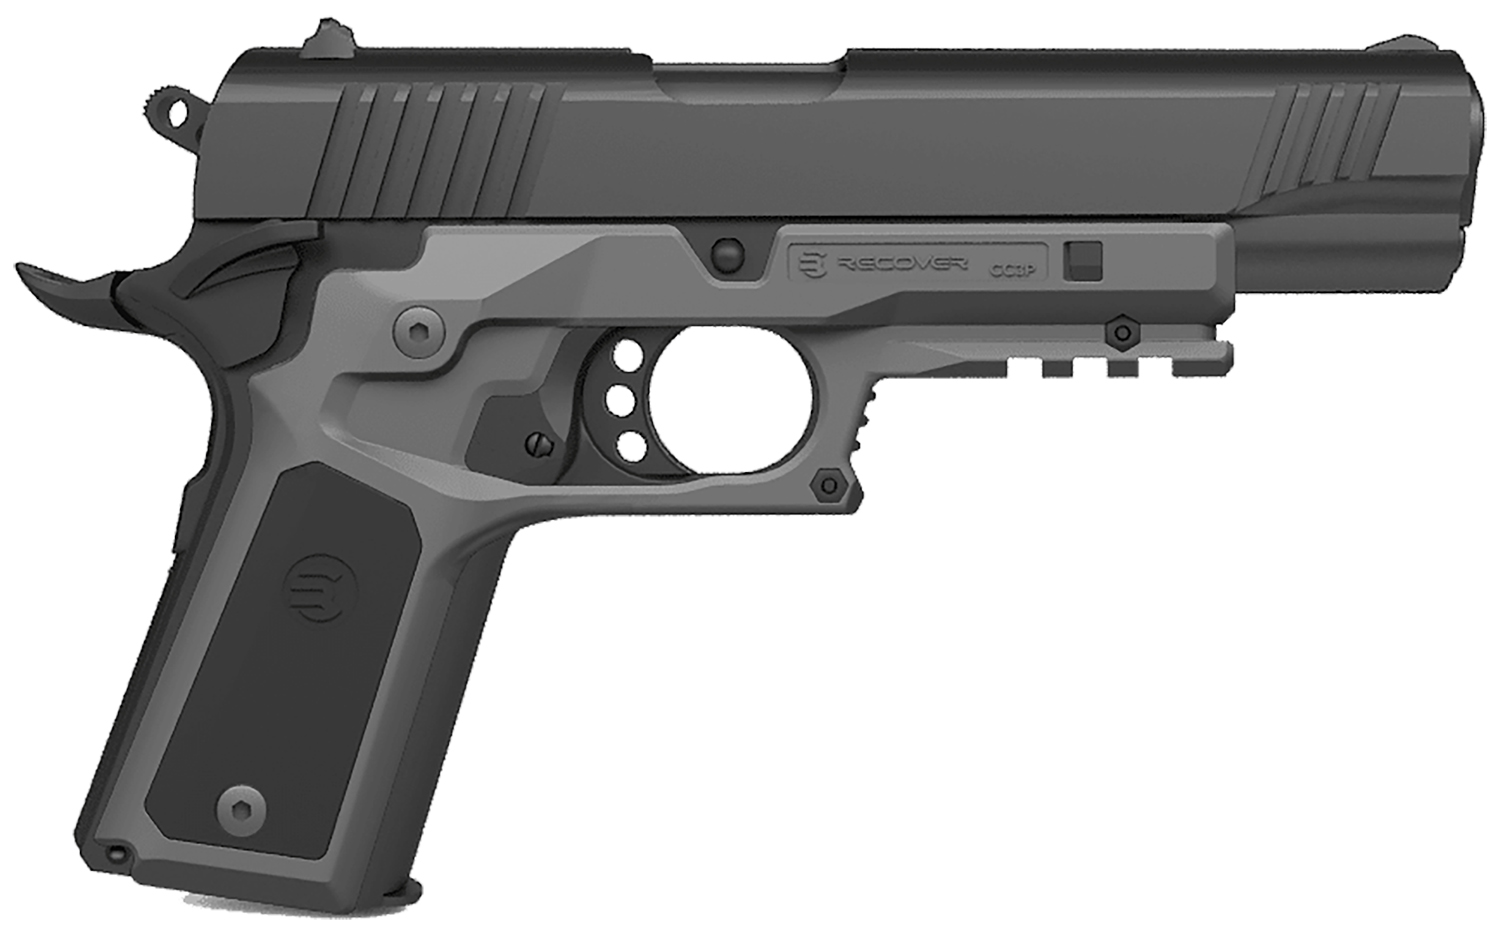 Recover Tactical CC3P0401 Frame Grip  Gray Polymer Frame with Interchangeable Black & Gray Panels for Standard Frame 1911